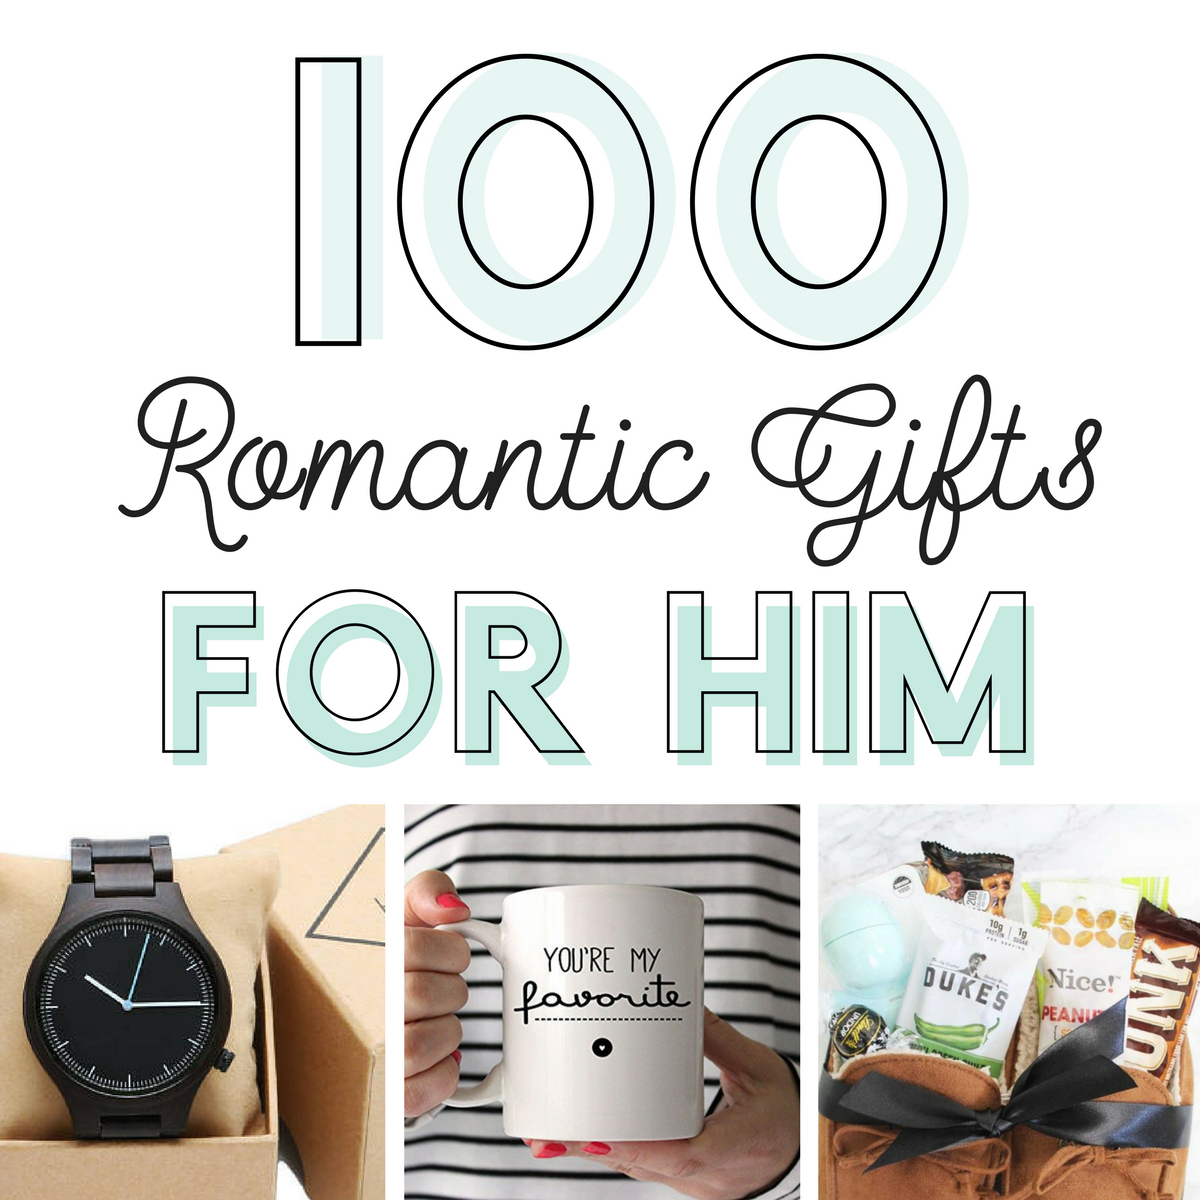 10 Ideal Ideas For Anniversary Gifts For Men 100 romantic gifts for him from the dating divas 2022